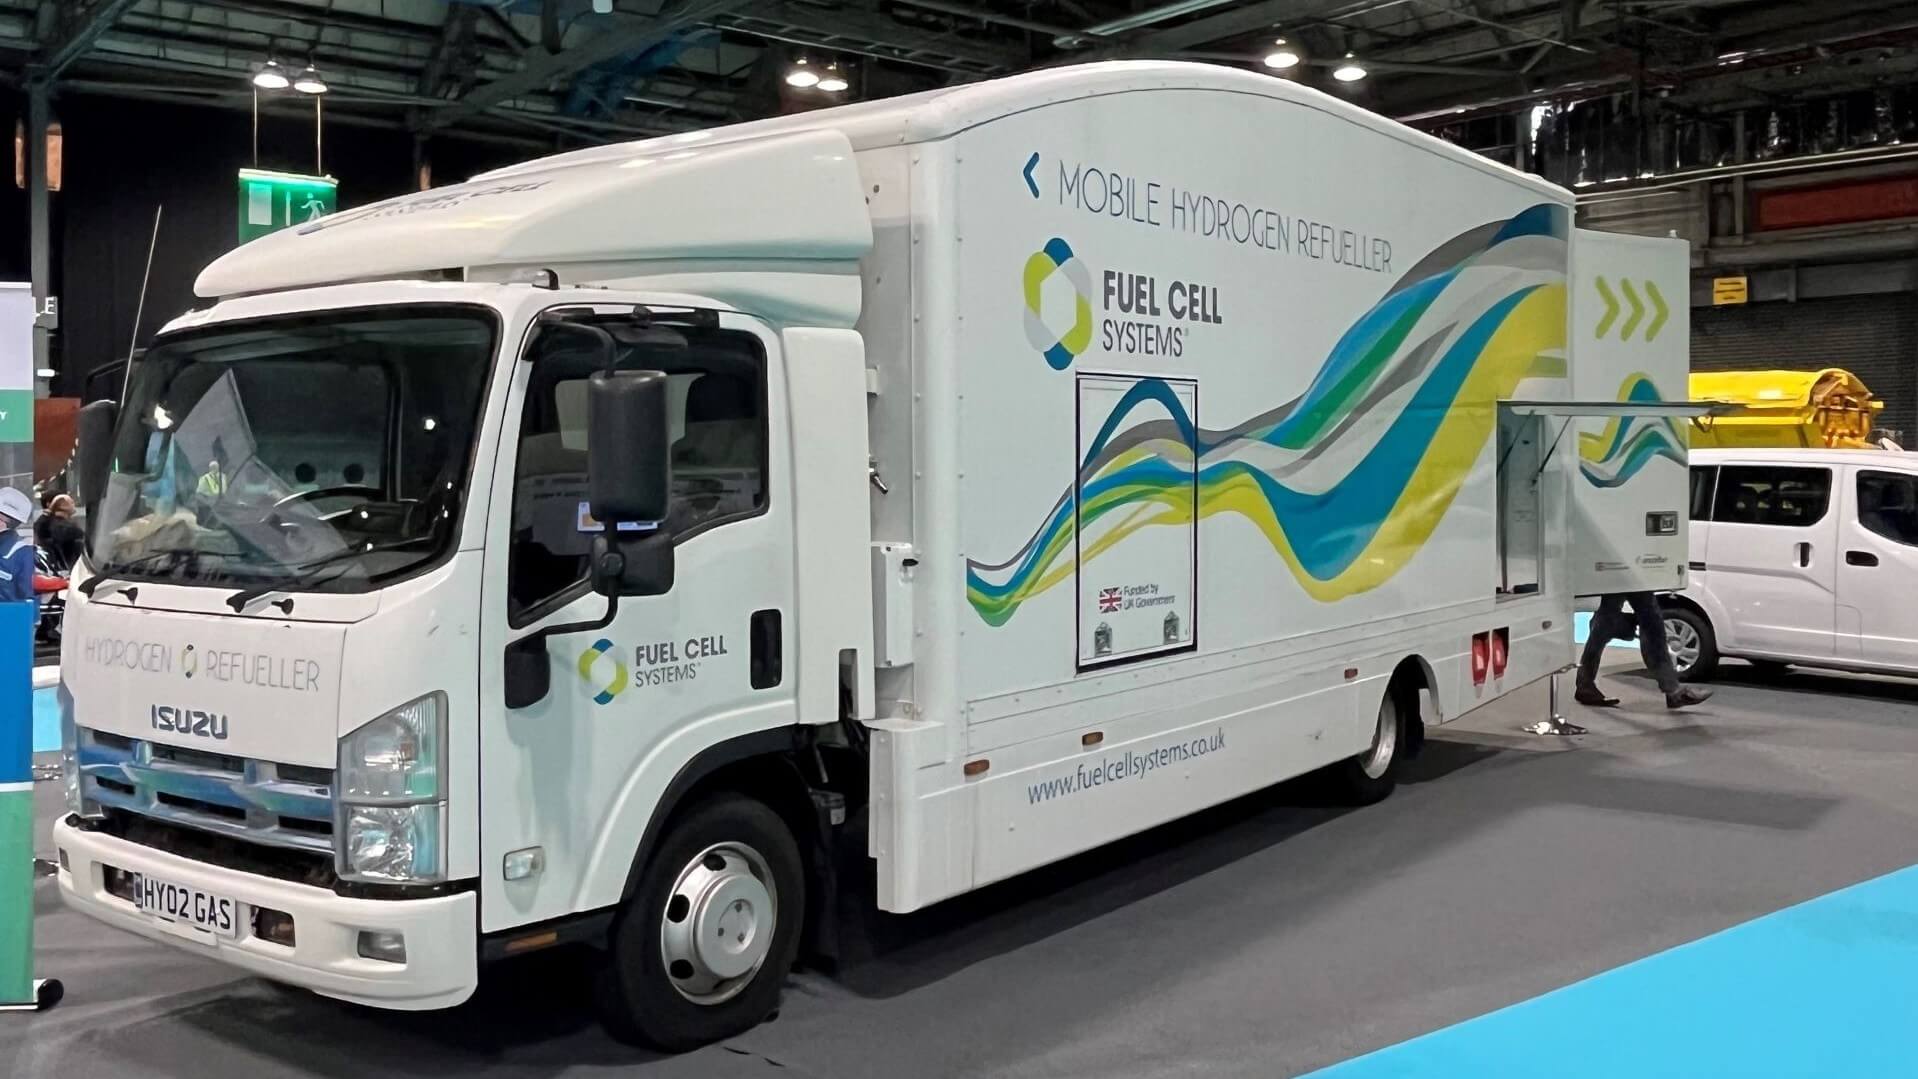 mobile hydrogen refuelling truck on show stand